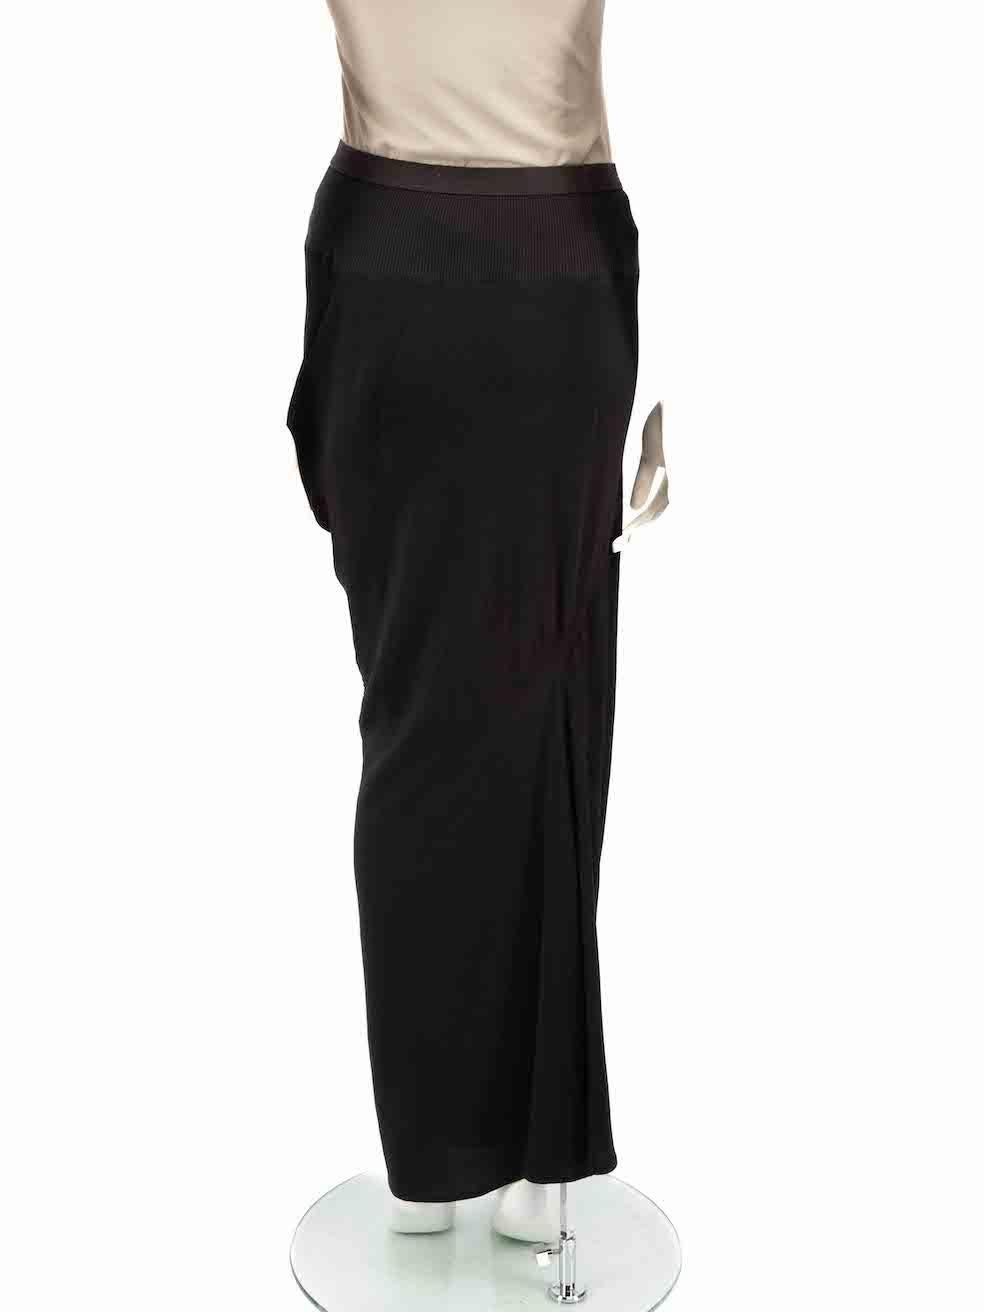 Rick Owens AW 15 Black Asymmetric Drape Midi Skirt Size S In Good Condition For Sale In London, GB